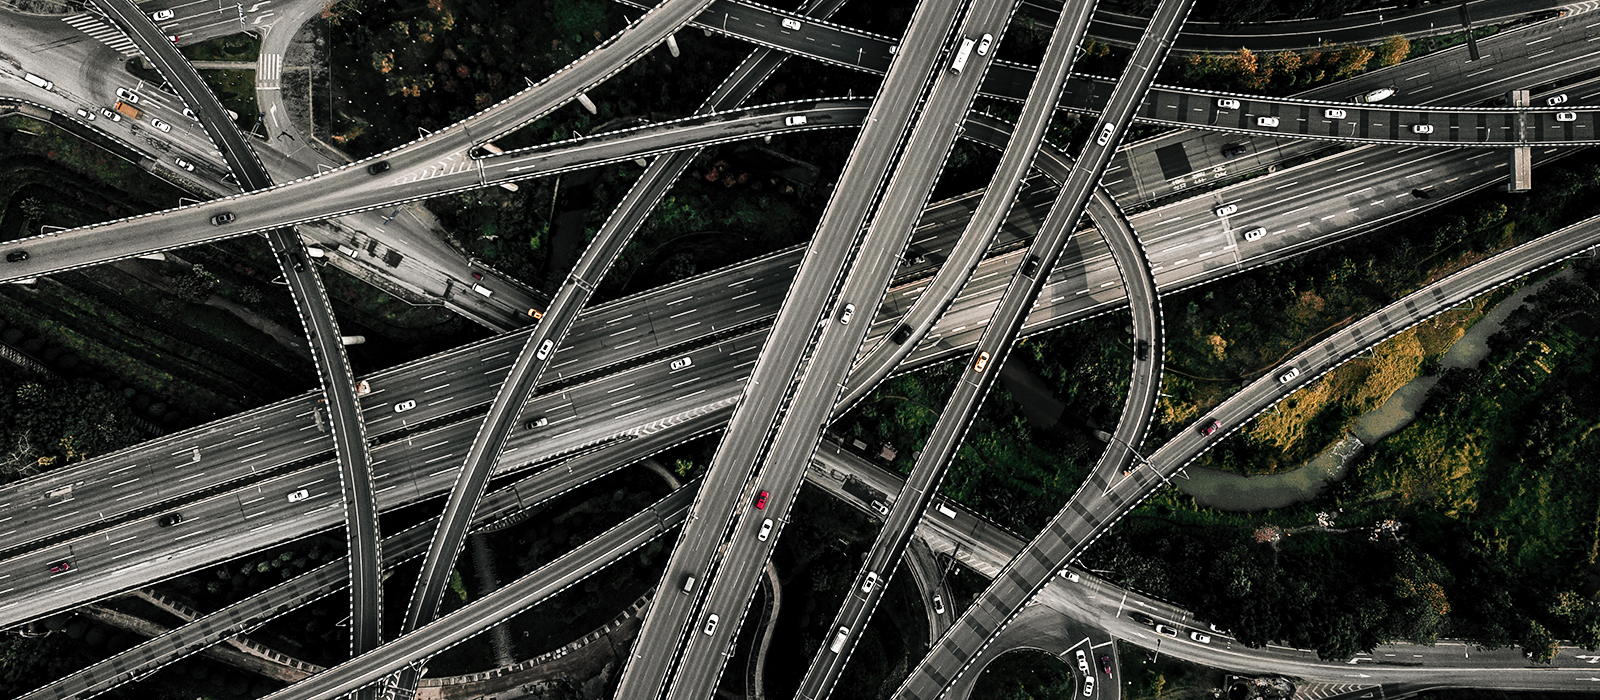 Overhead view of overlapping highways